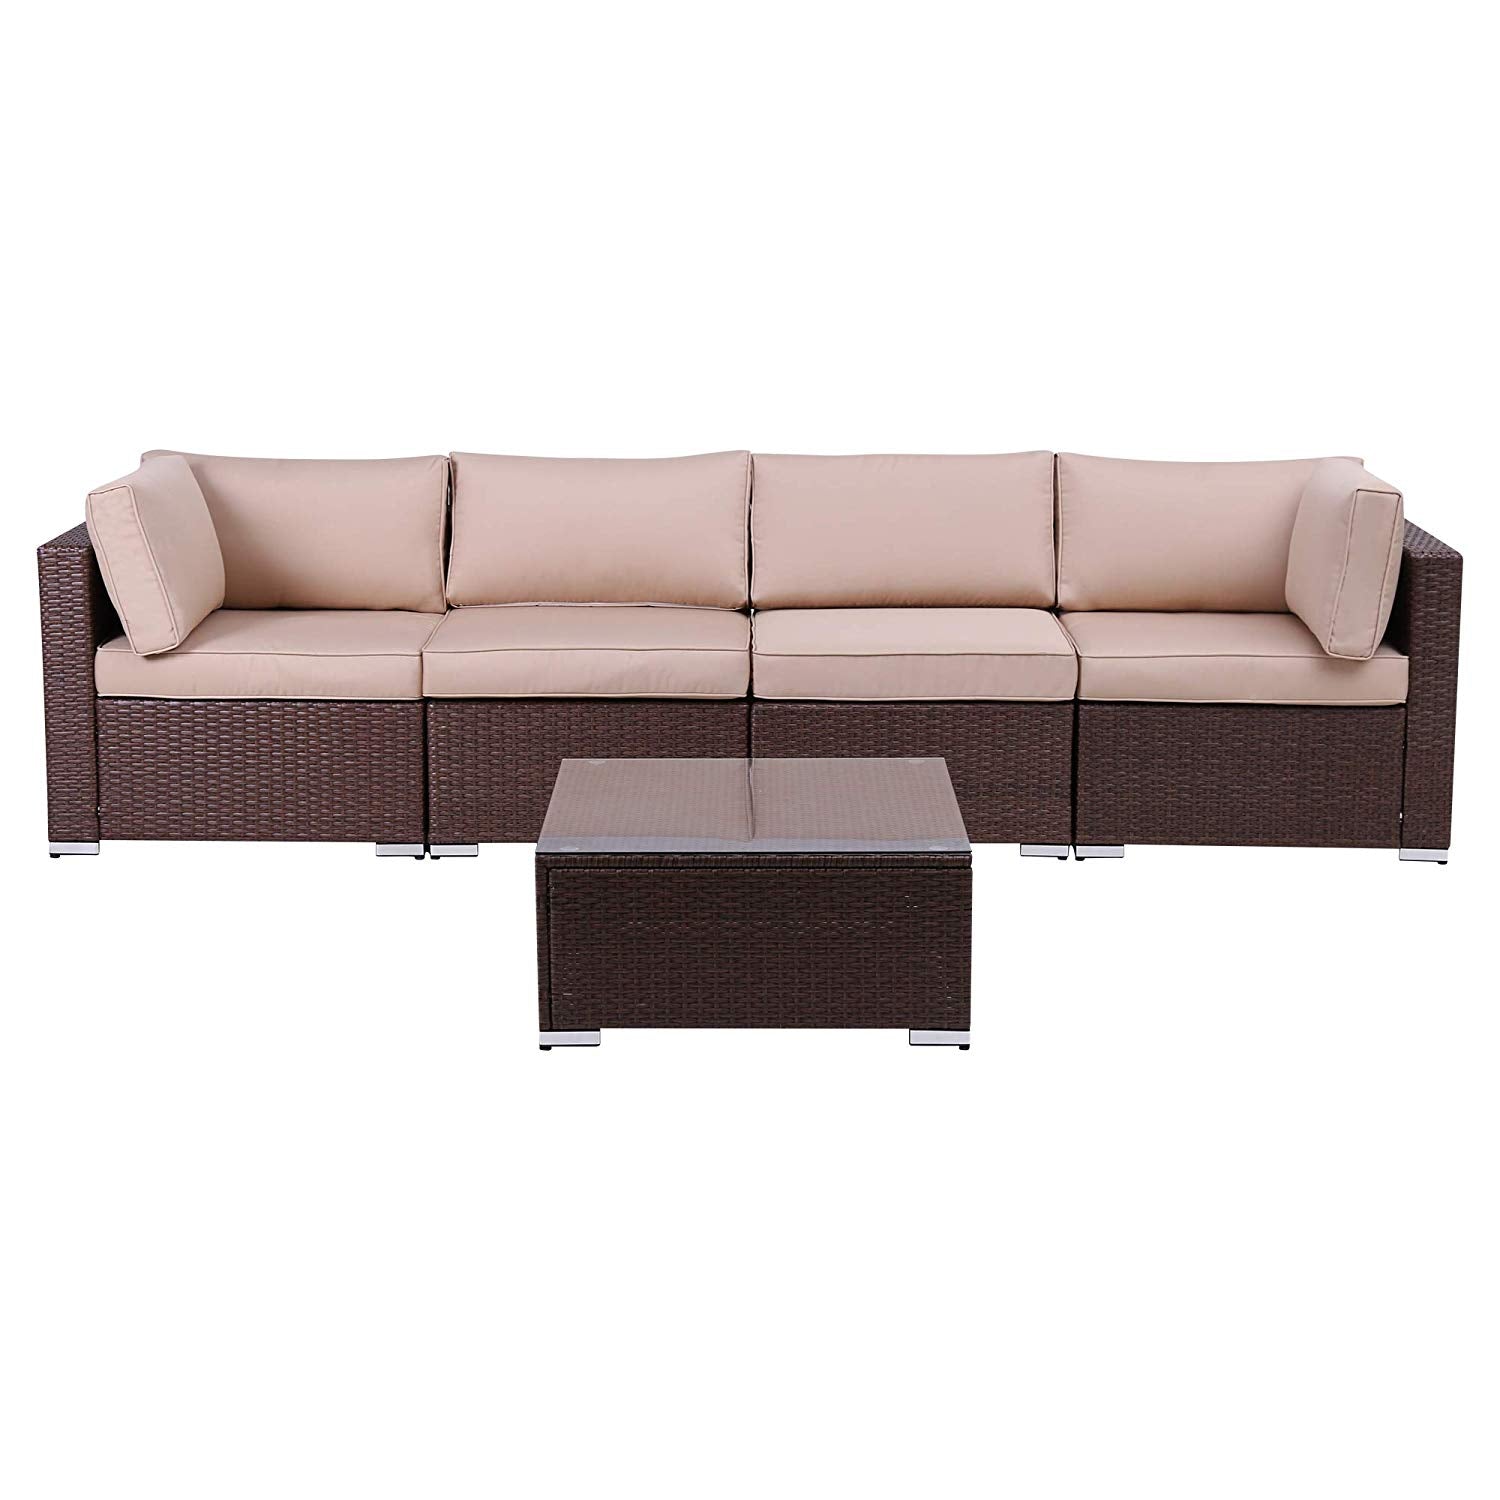 5 Pieces Furniture Sectional Wicker Sofa with Coffee Table - Sunvivi